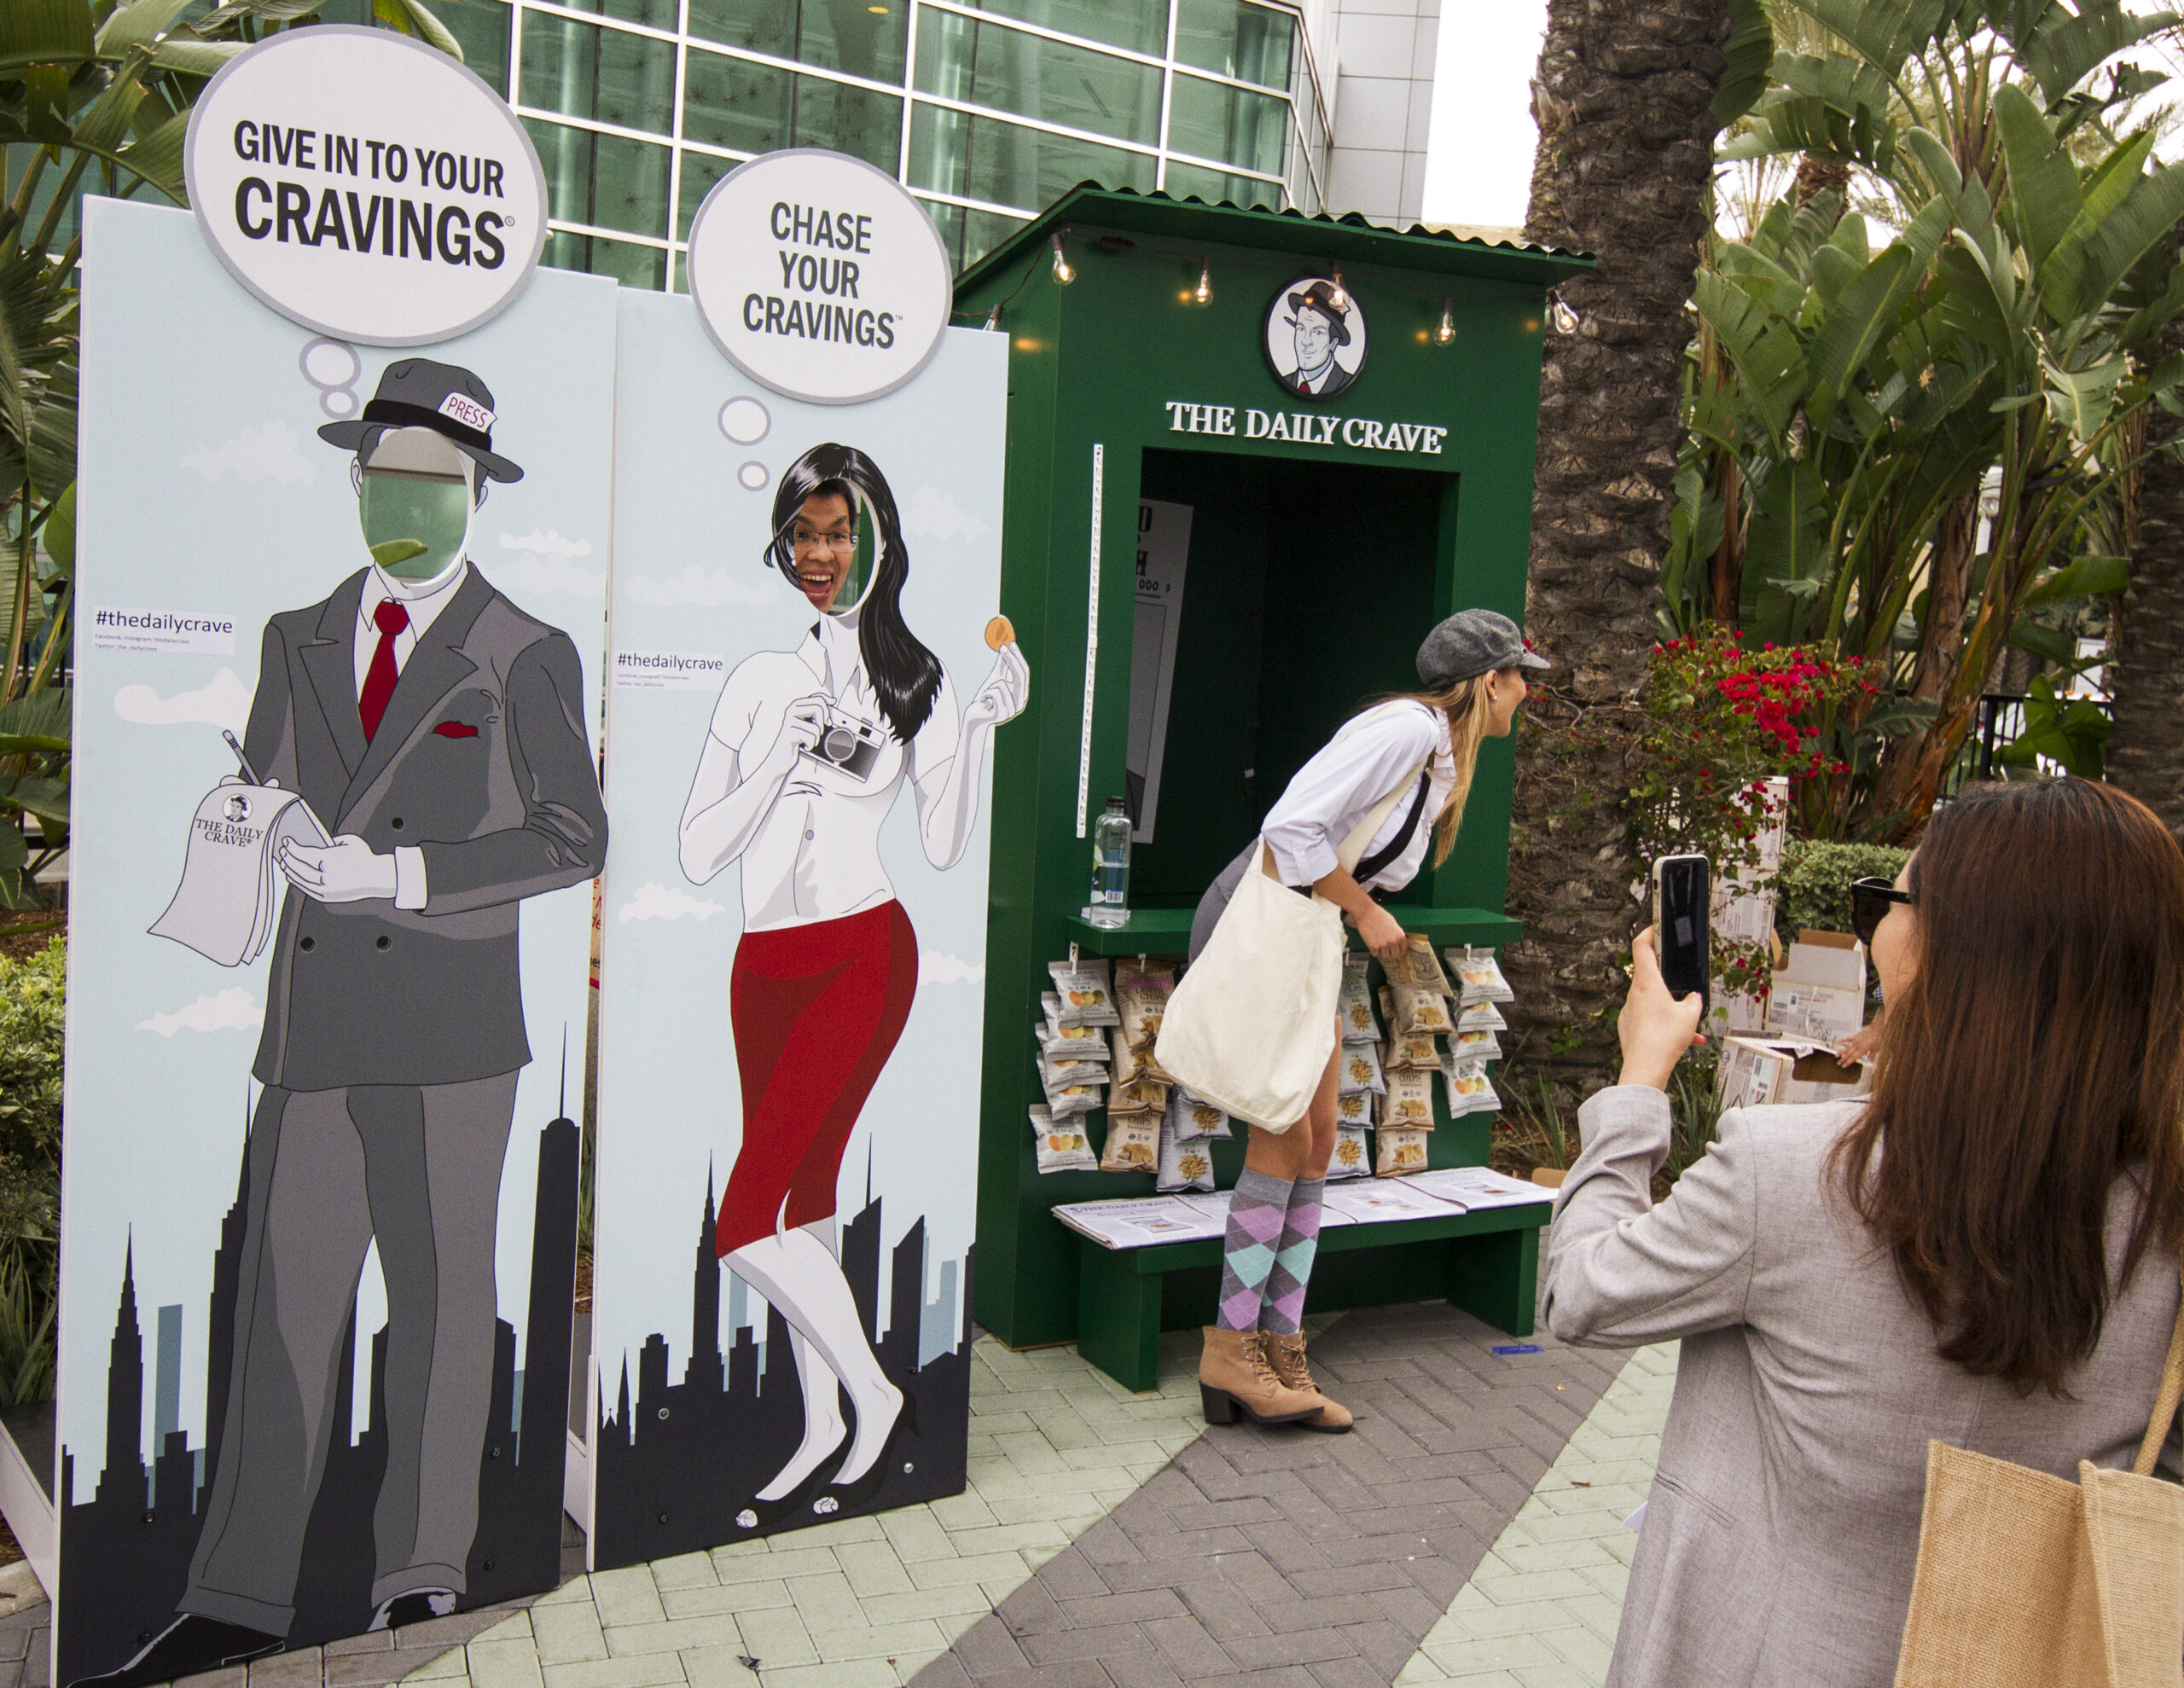 Customer Photographing The Daily Crave Self-Contained Exhibit Outside the Natural Products Expo West